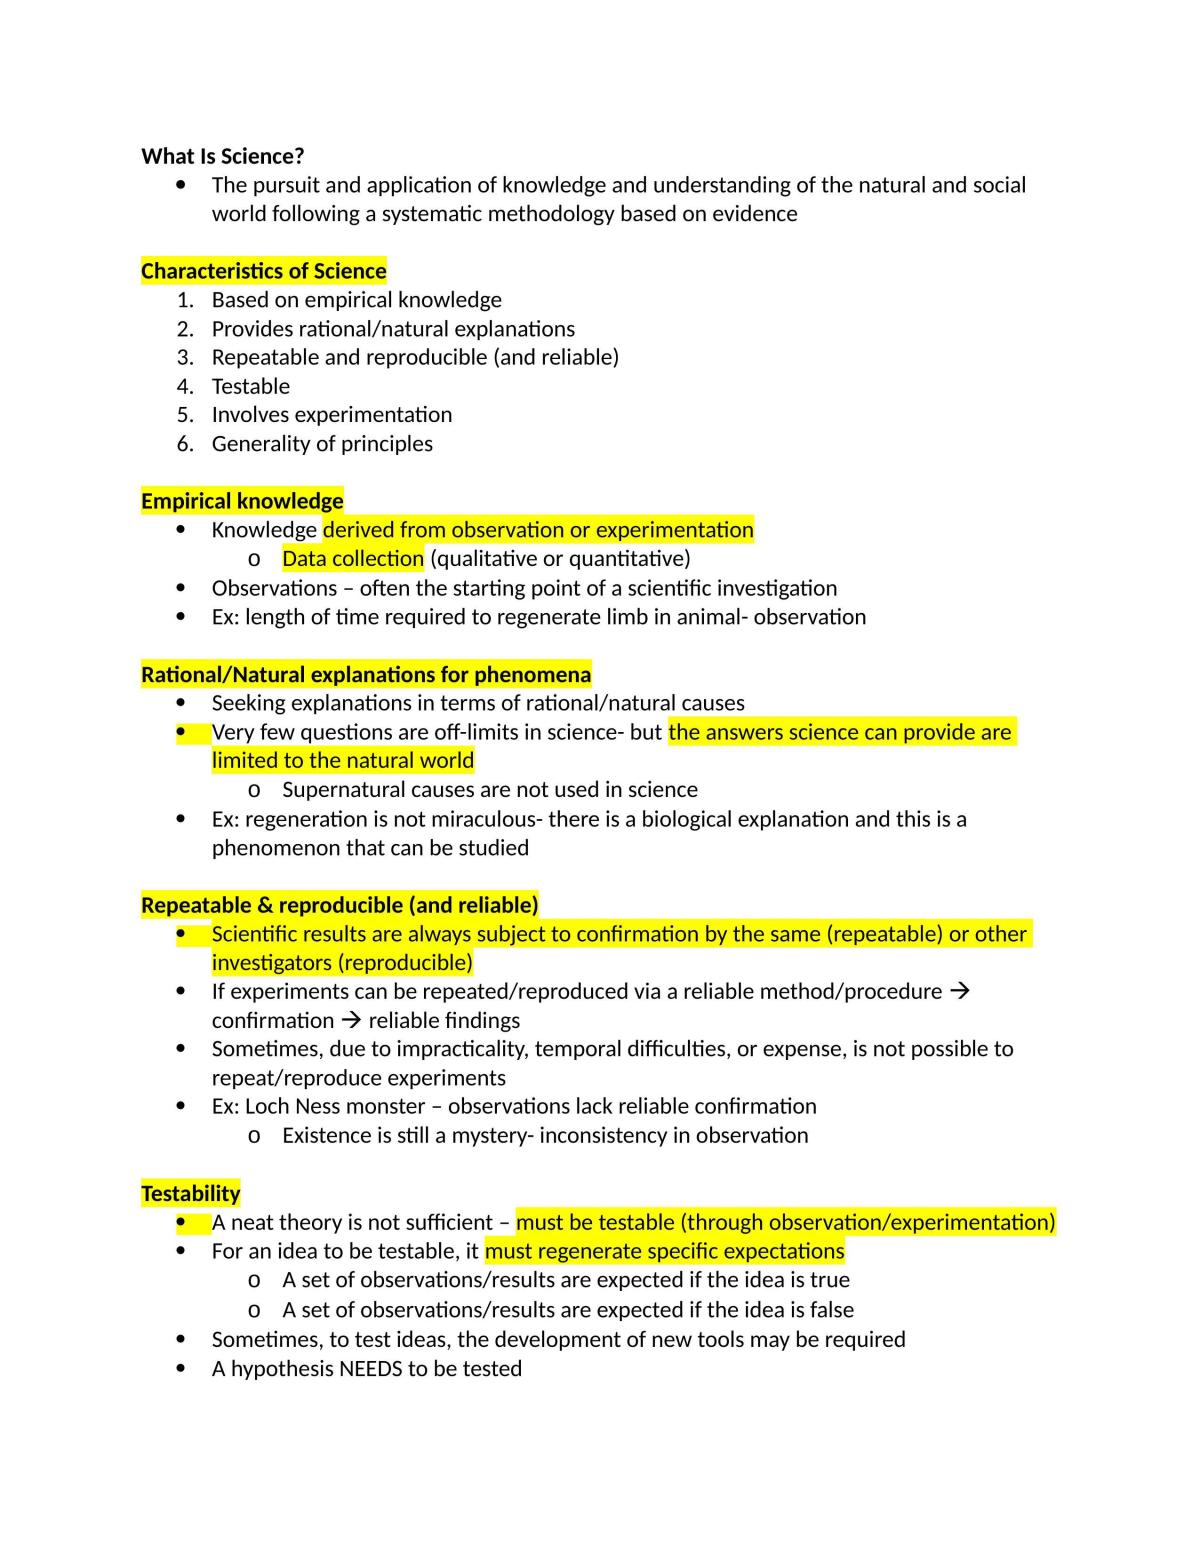 Complete Study Notes - LIFESCI 2A03 | LIFESCI 2A03 - Research Methods ...